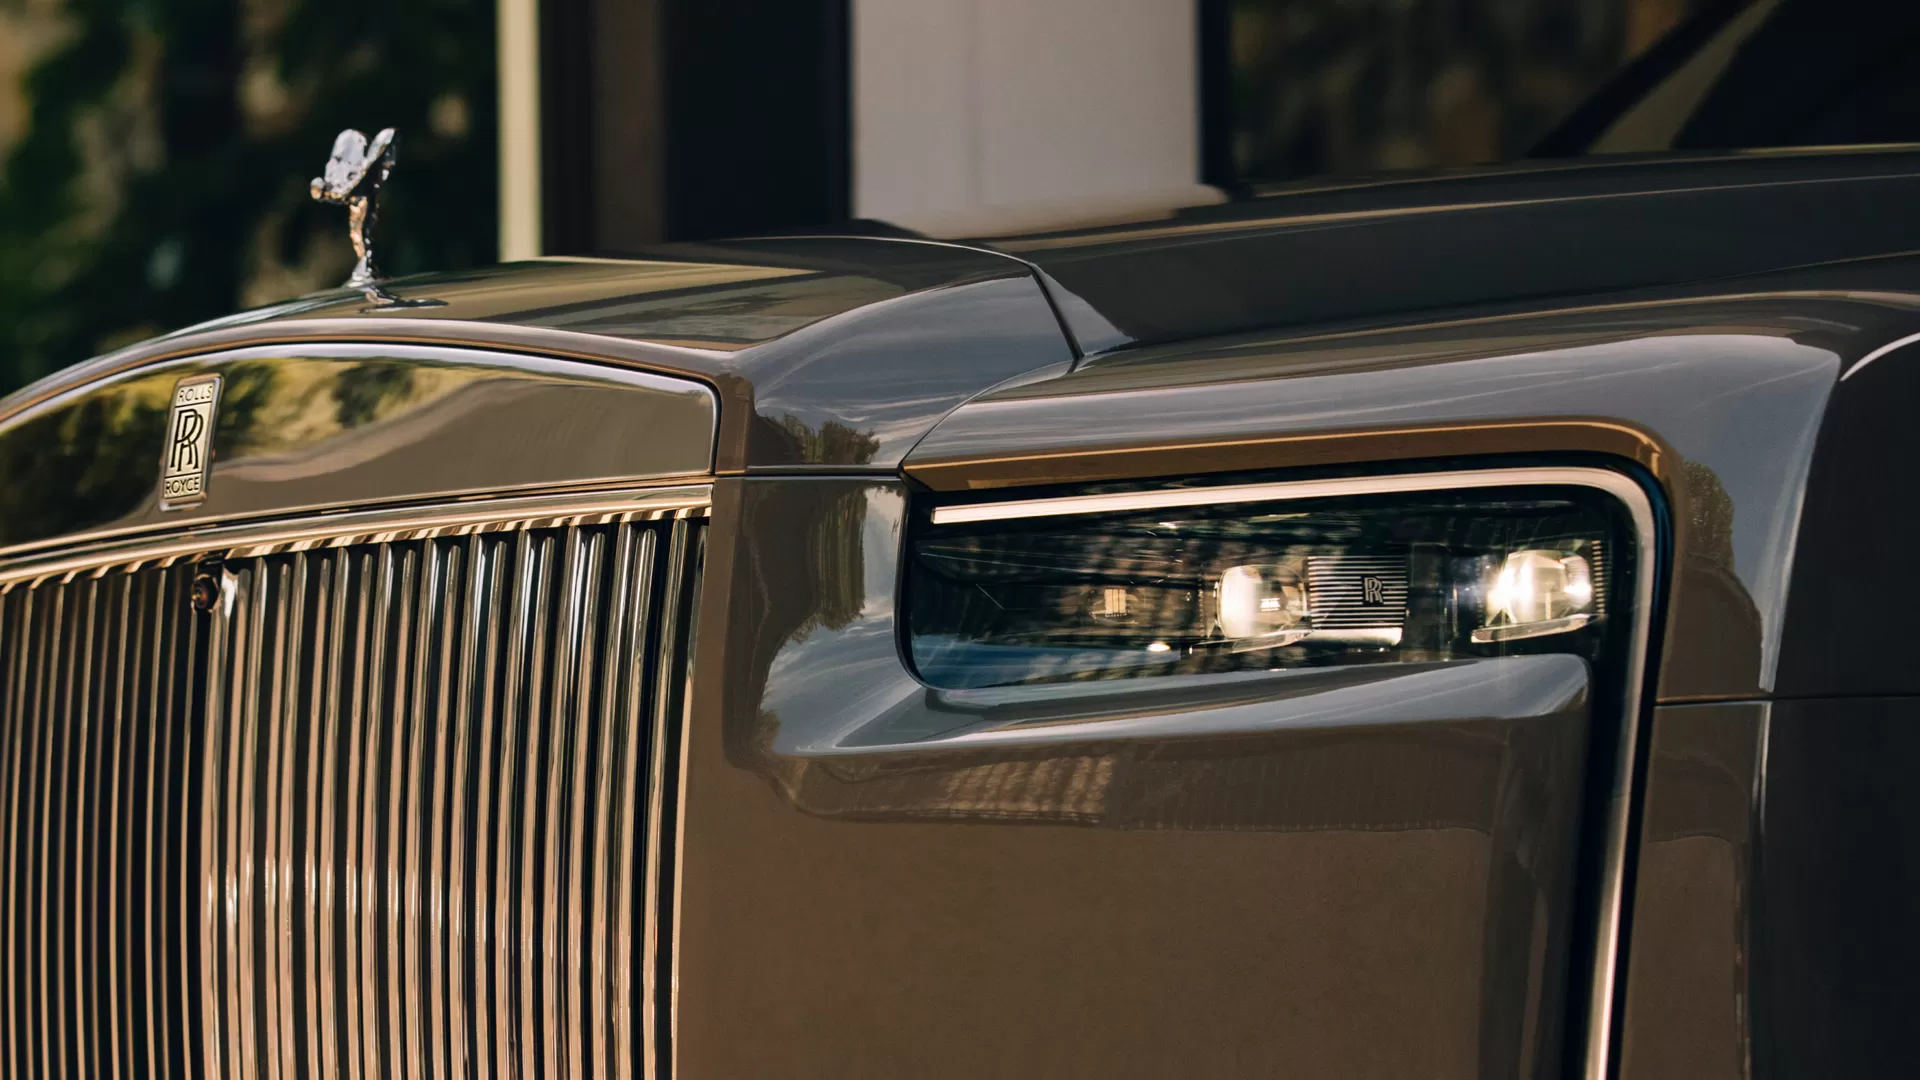 The Return of the Blacked-Out Rolls-Royce Cullinan Black Badge